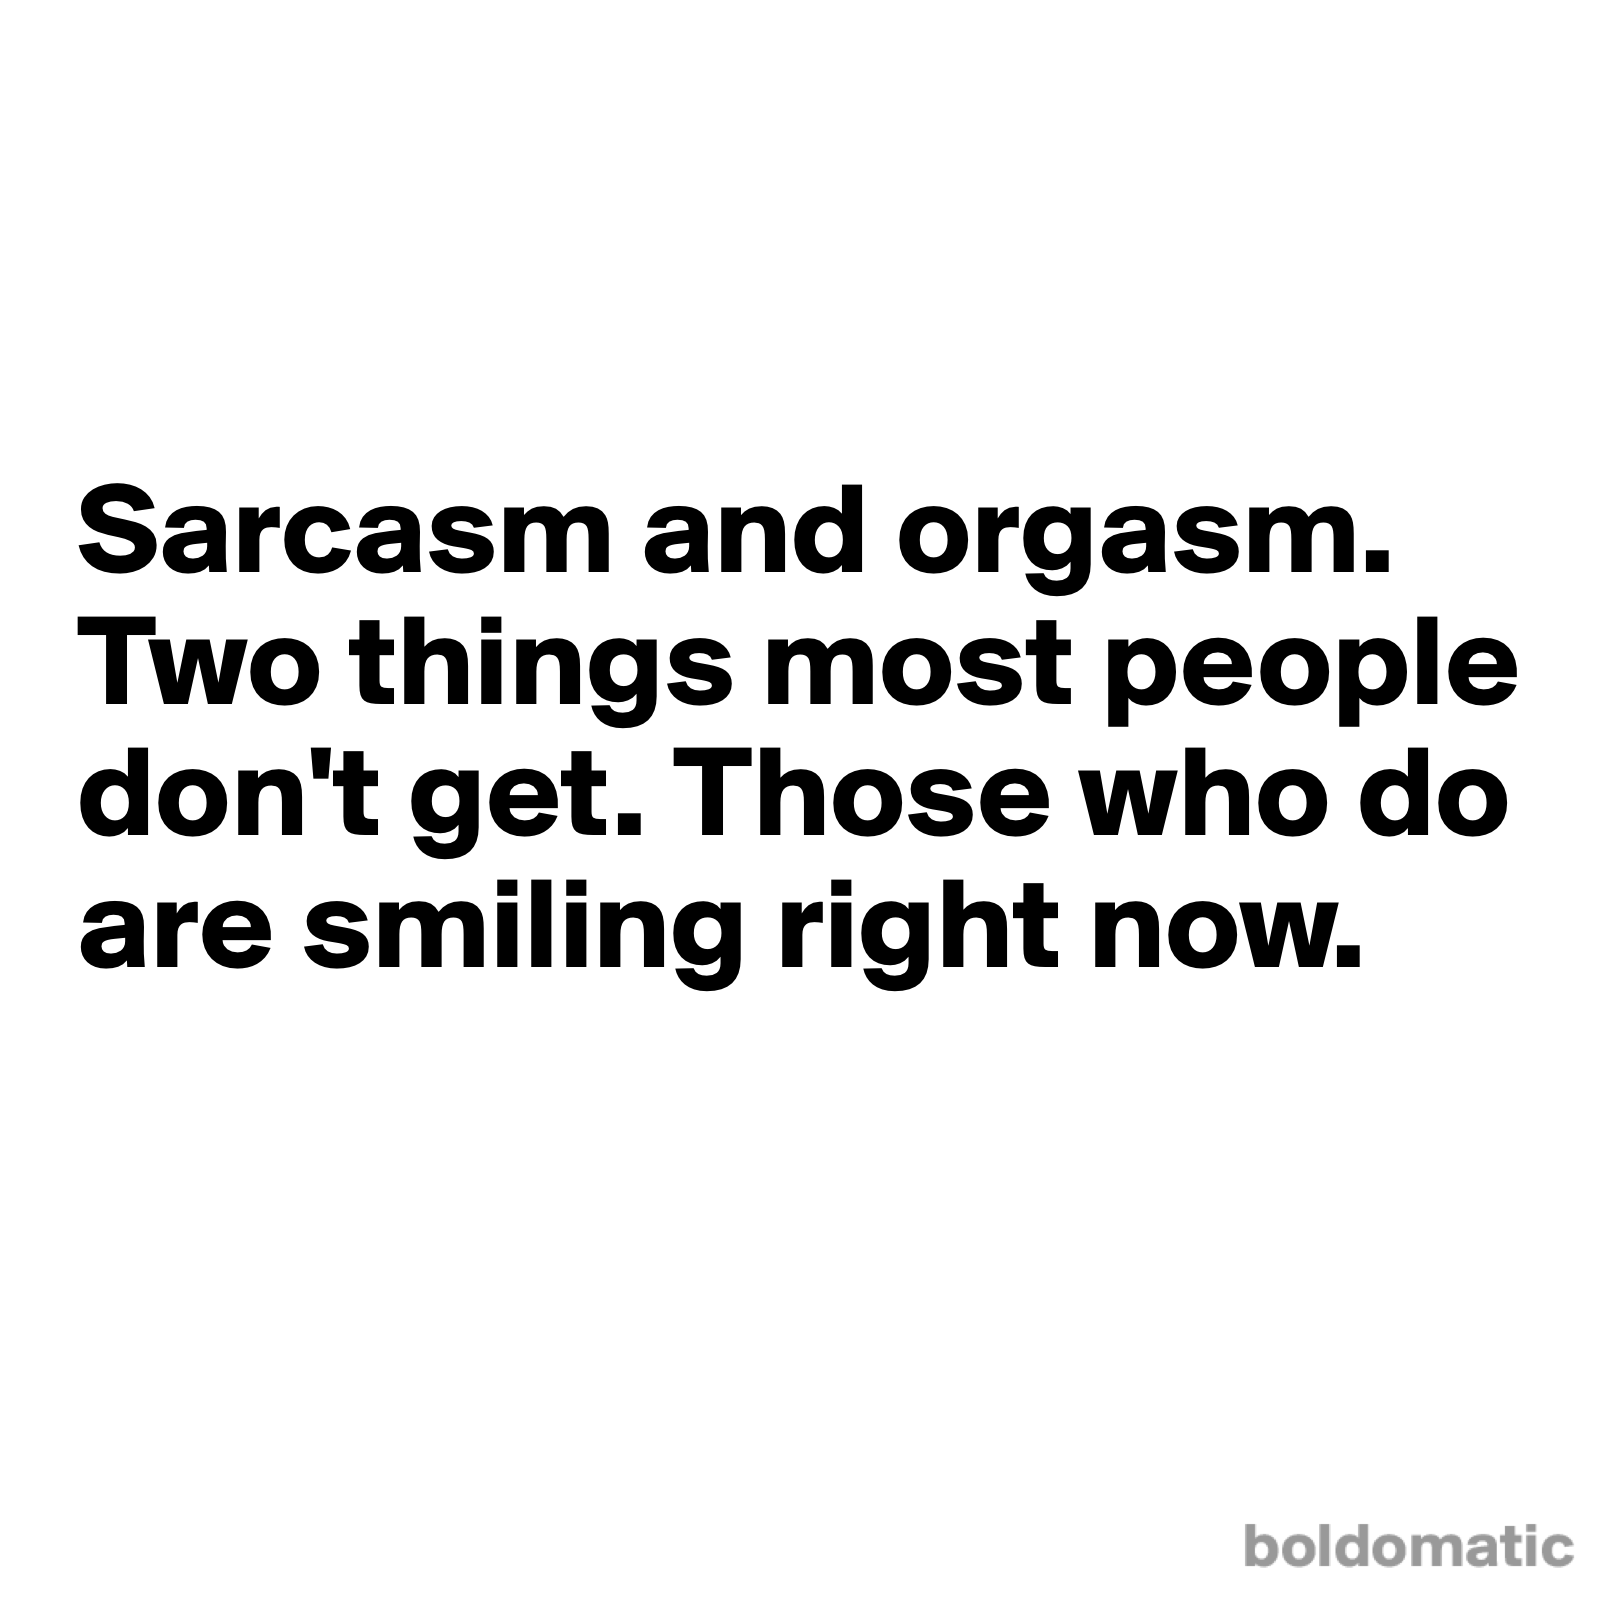 Boldomatic On Twitter Sarcasm And Orgasm Two Things Most People Don T Get Those Who Do Are Smiling Right Now Boldomatic Http T Co Jtfenfo5kk Cookies that ensure boldomatic works properly. twitter